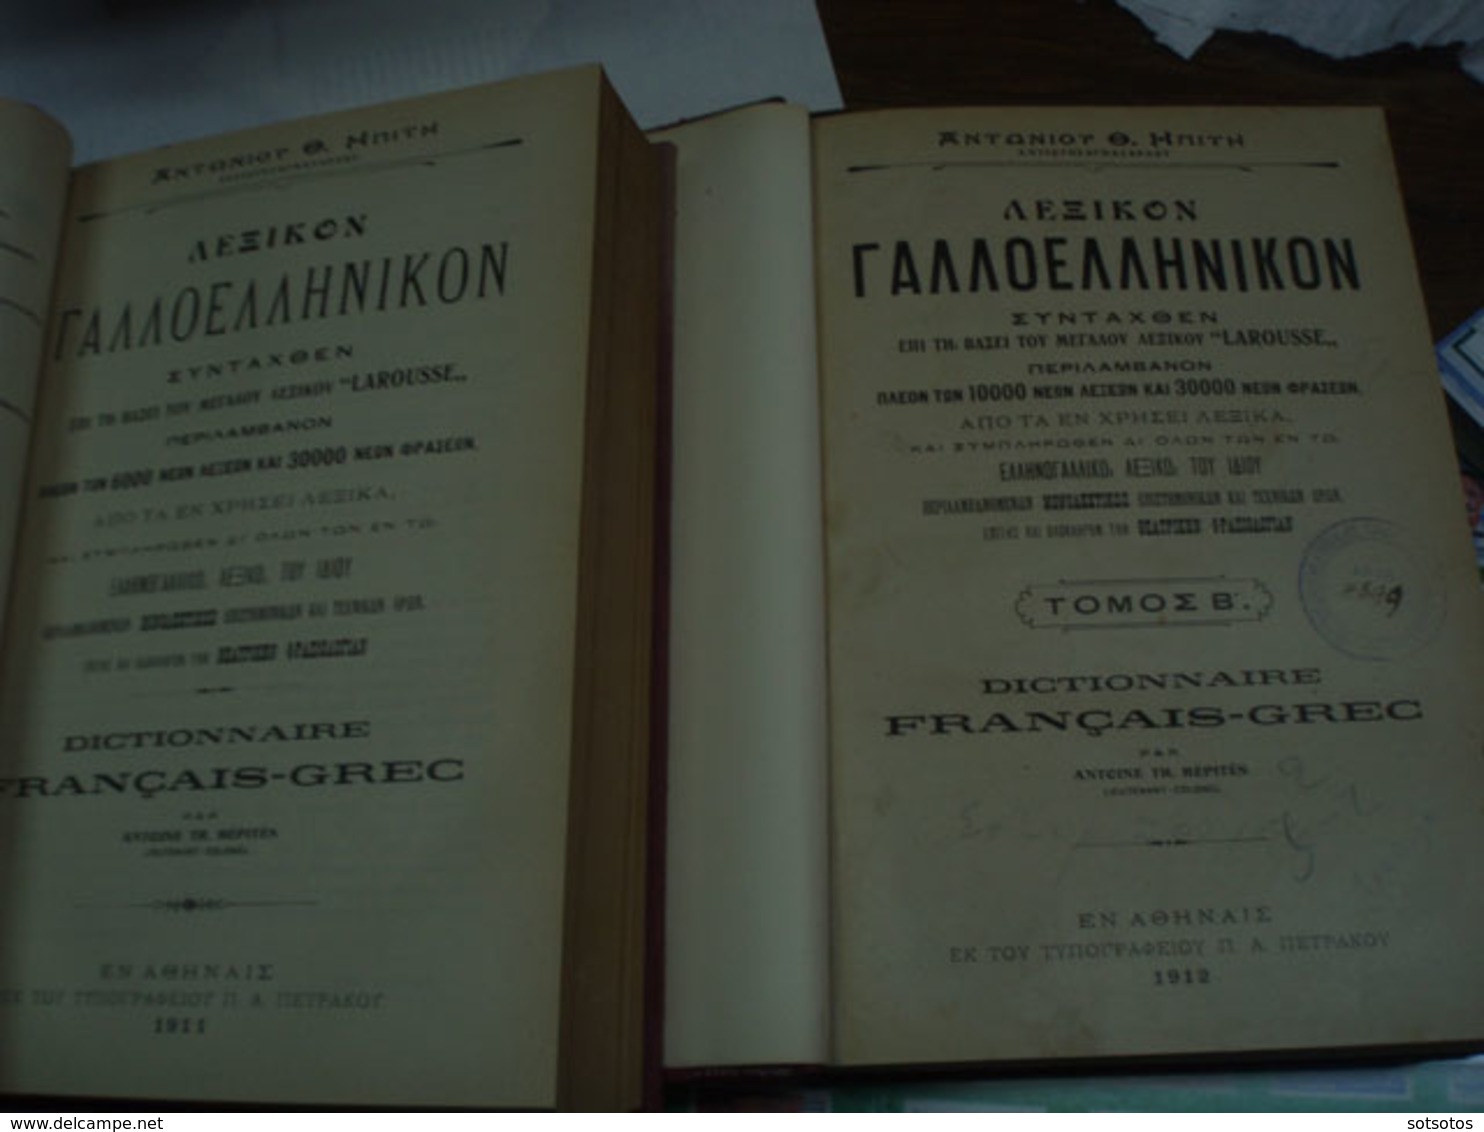 FRANCAIS-GREC: Ant. IPITI -  A' Vol. (1911) 1248+48 Pages, B' Vol.  (1912) 1344 Pages - Very Rare - Dictionaries